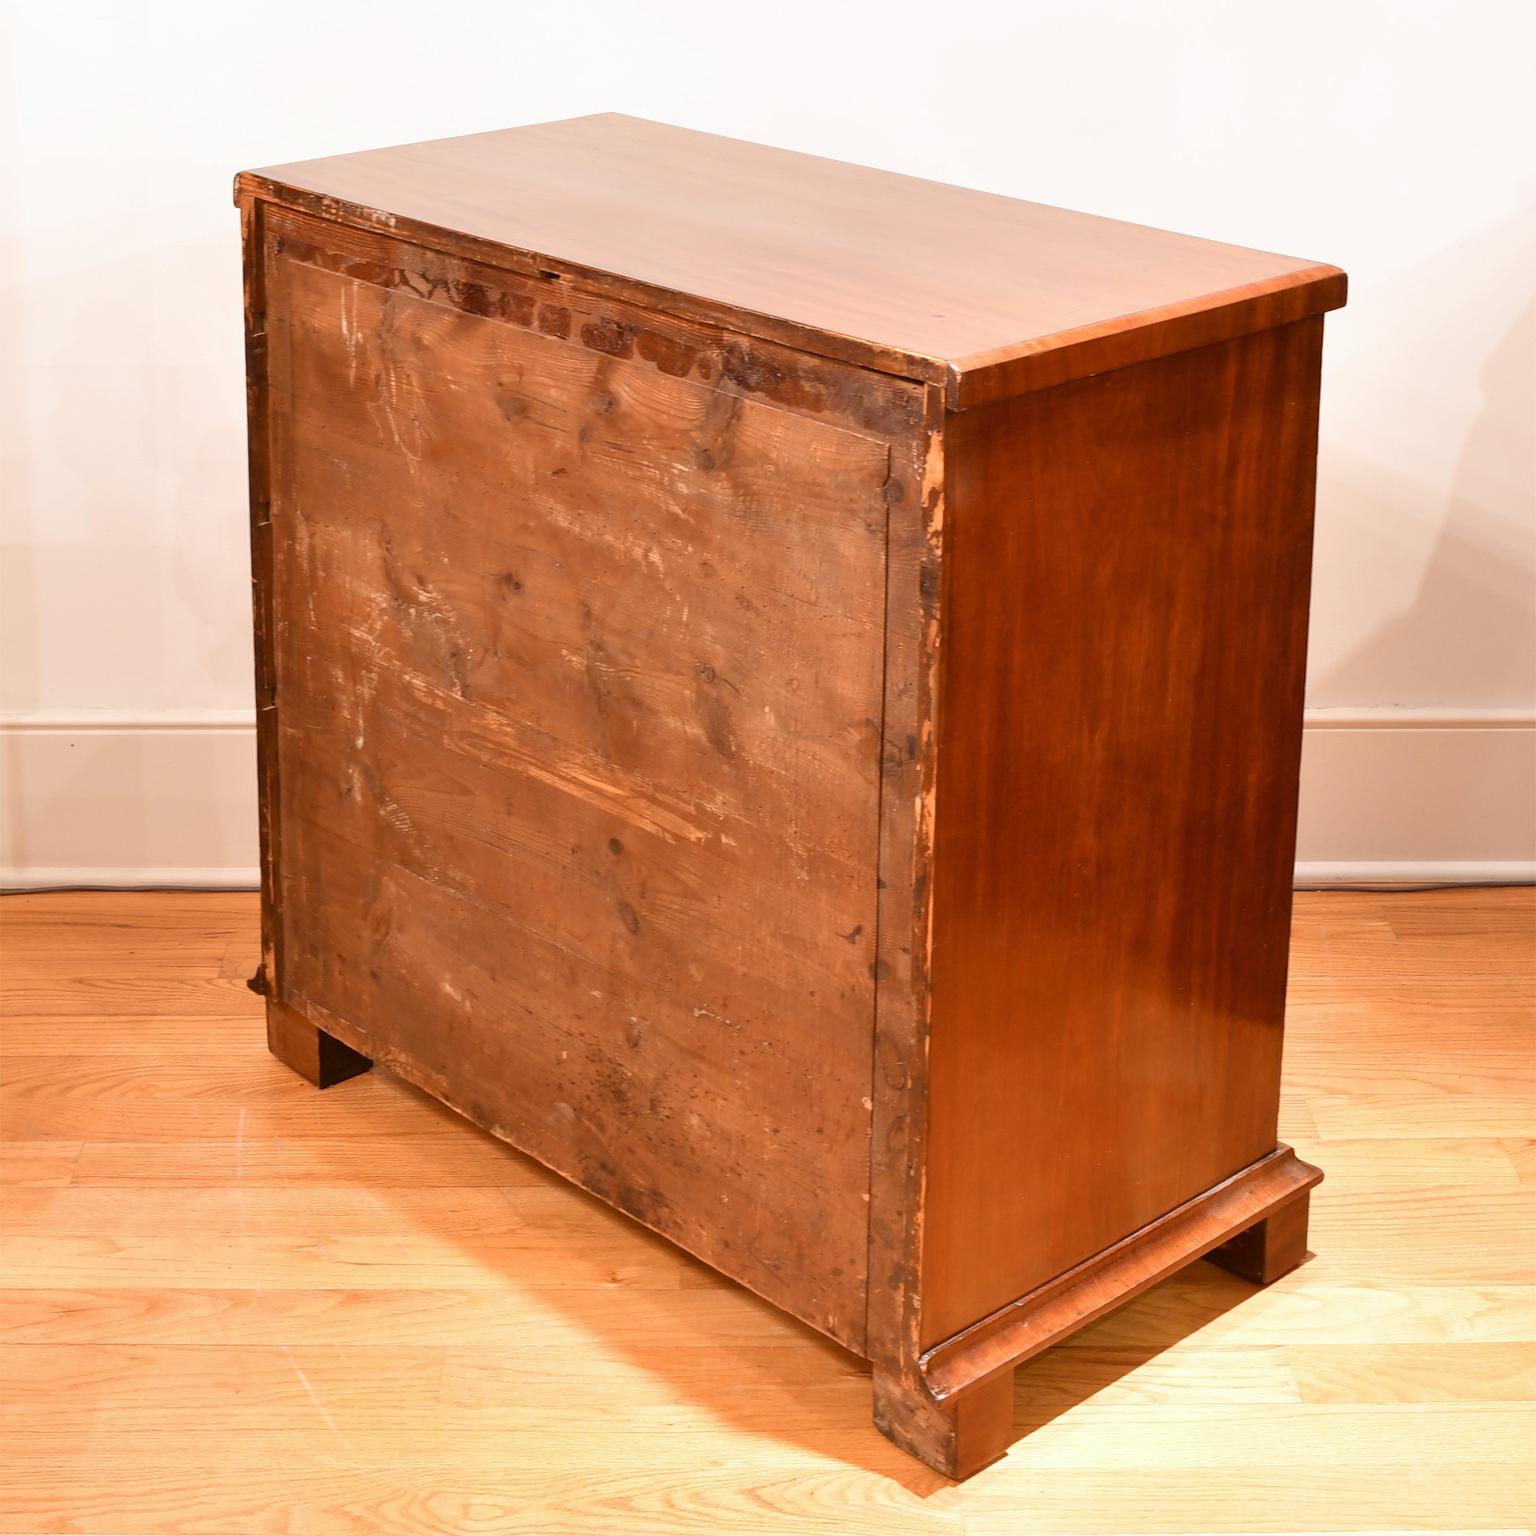 Antique Empire/ Biedermeier Chest of Drawers in West Indies Mahogany, c. 1825 For Sale 8